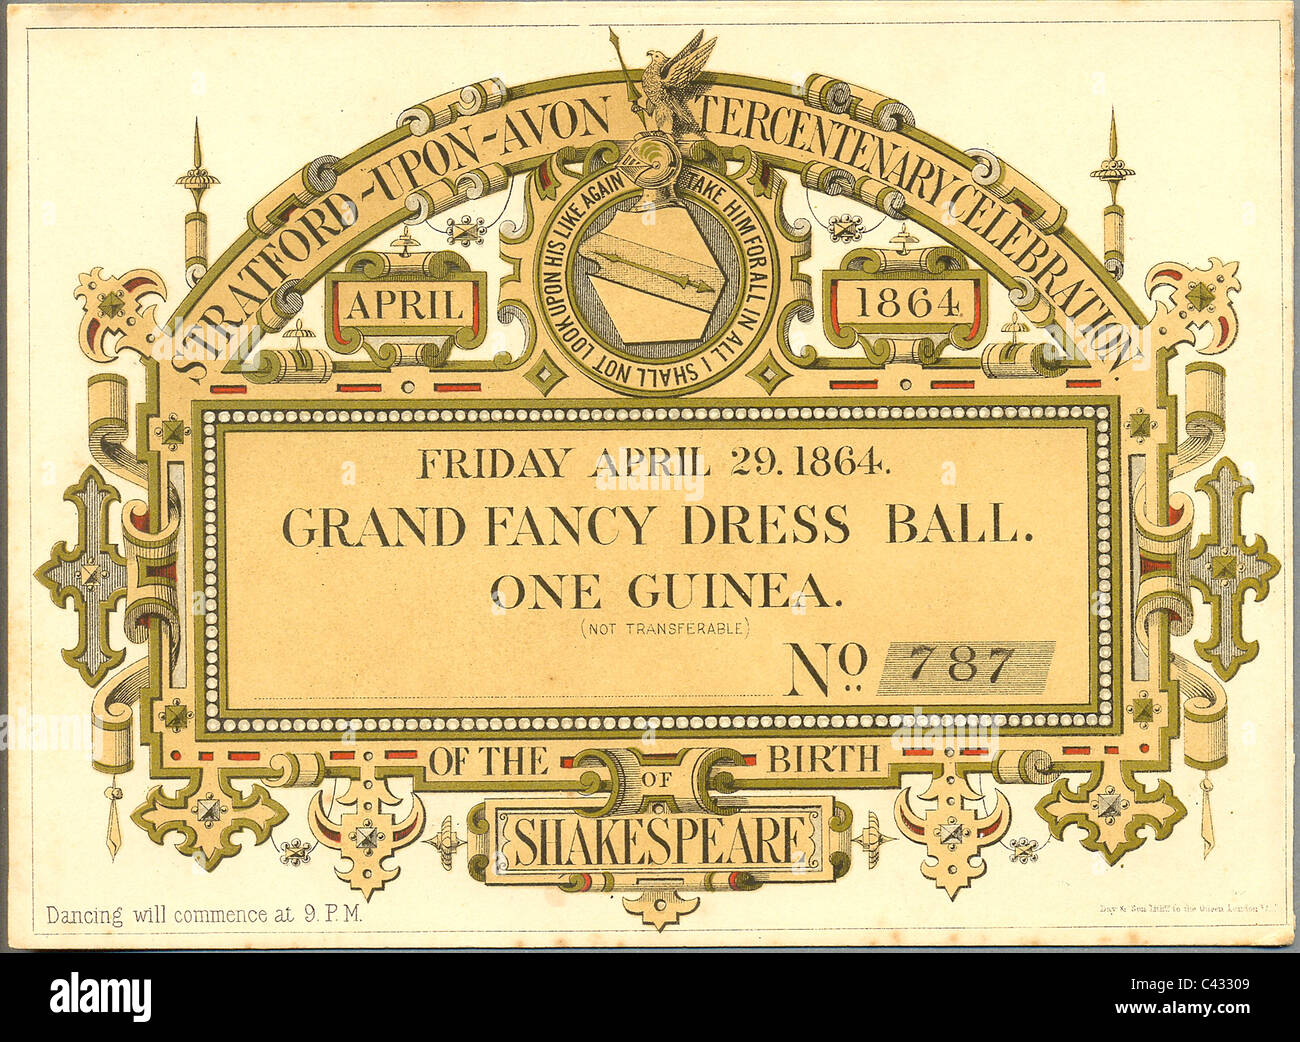 invitation to the Grand Fancy Dress Ball held in April 1864 to celebrate the tercentenary of the birth of Shakespeare Stock Photo